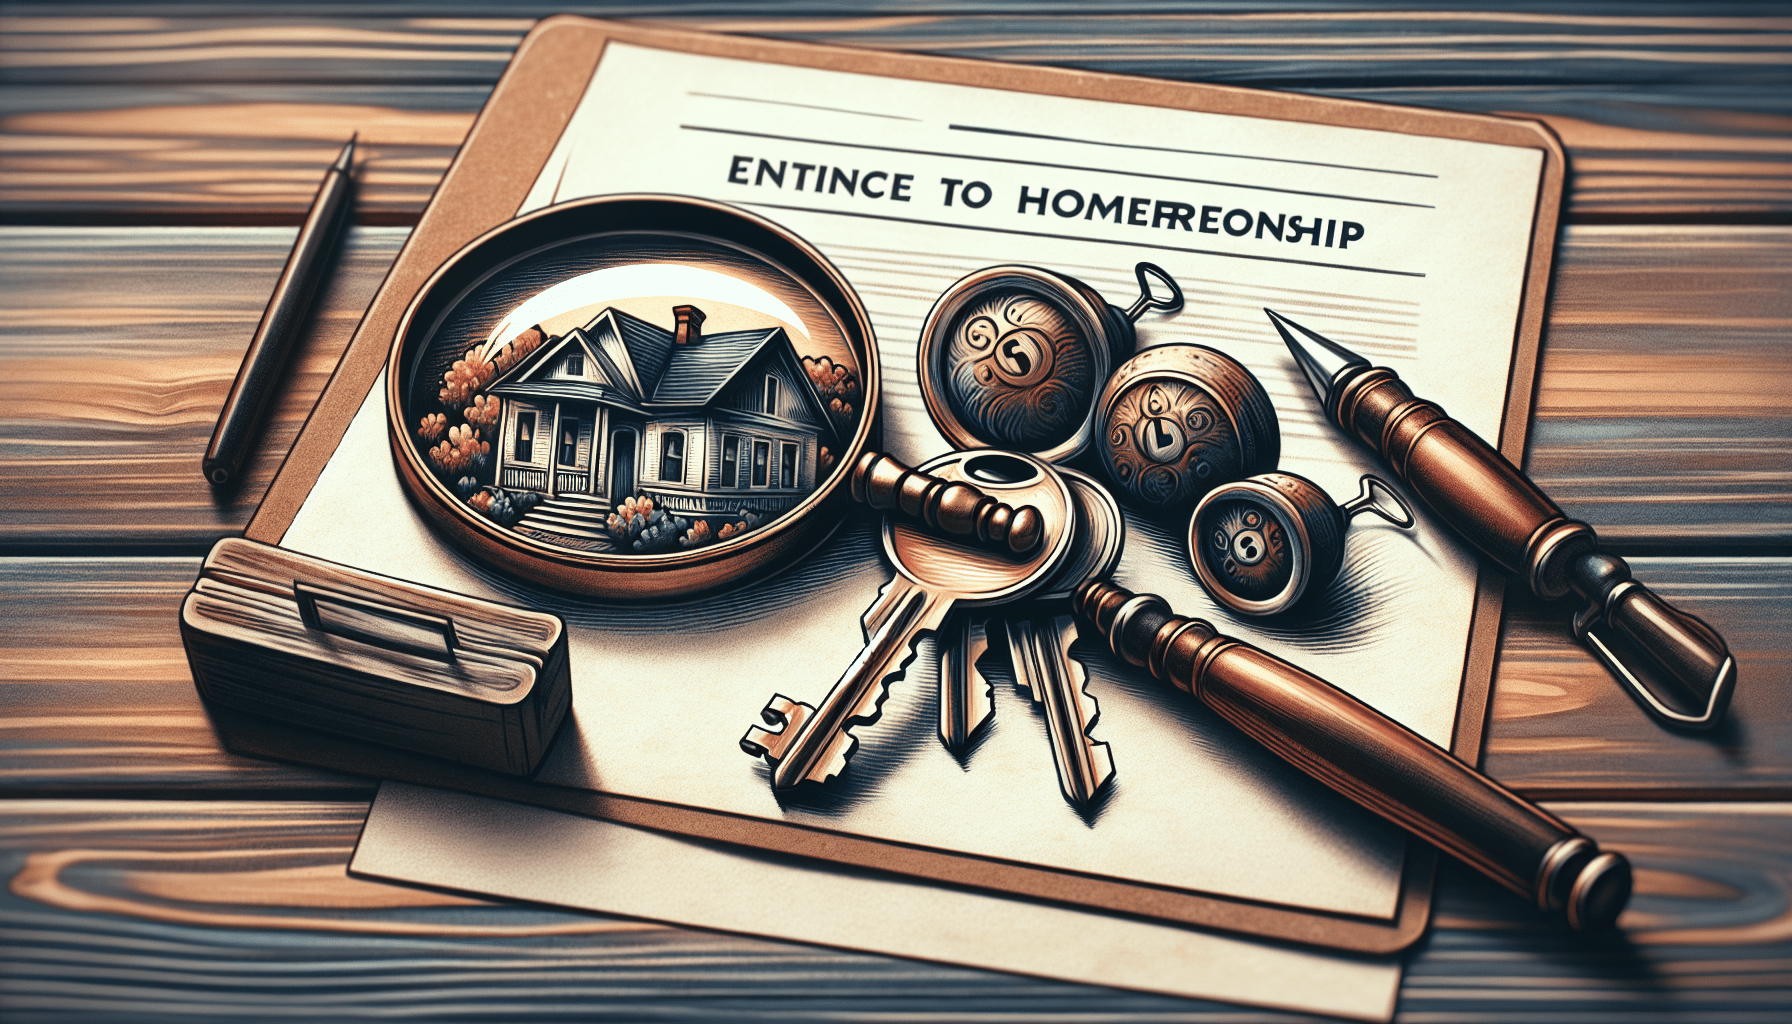 What Are Some Questions To Ask A Mortgage Lender When Considering A Home Loan?